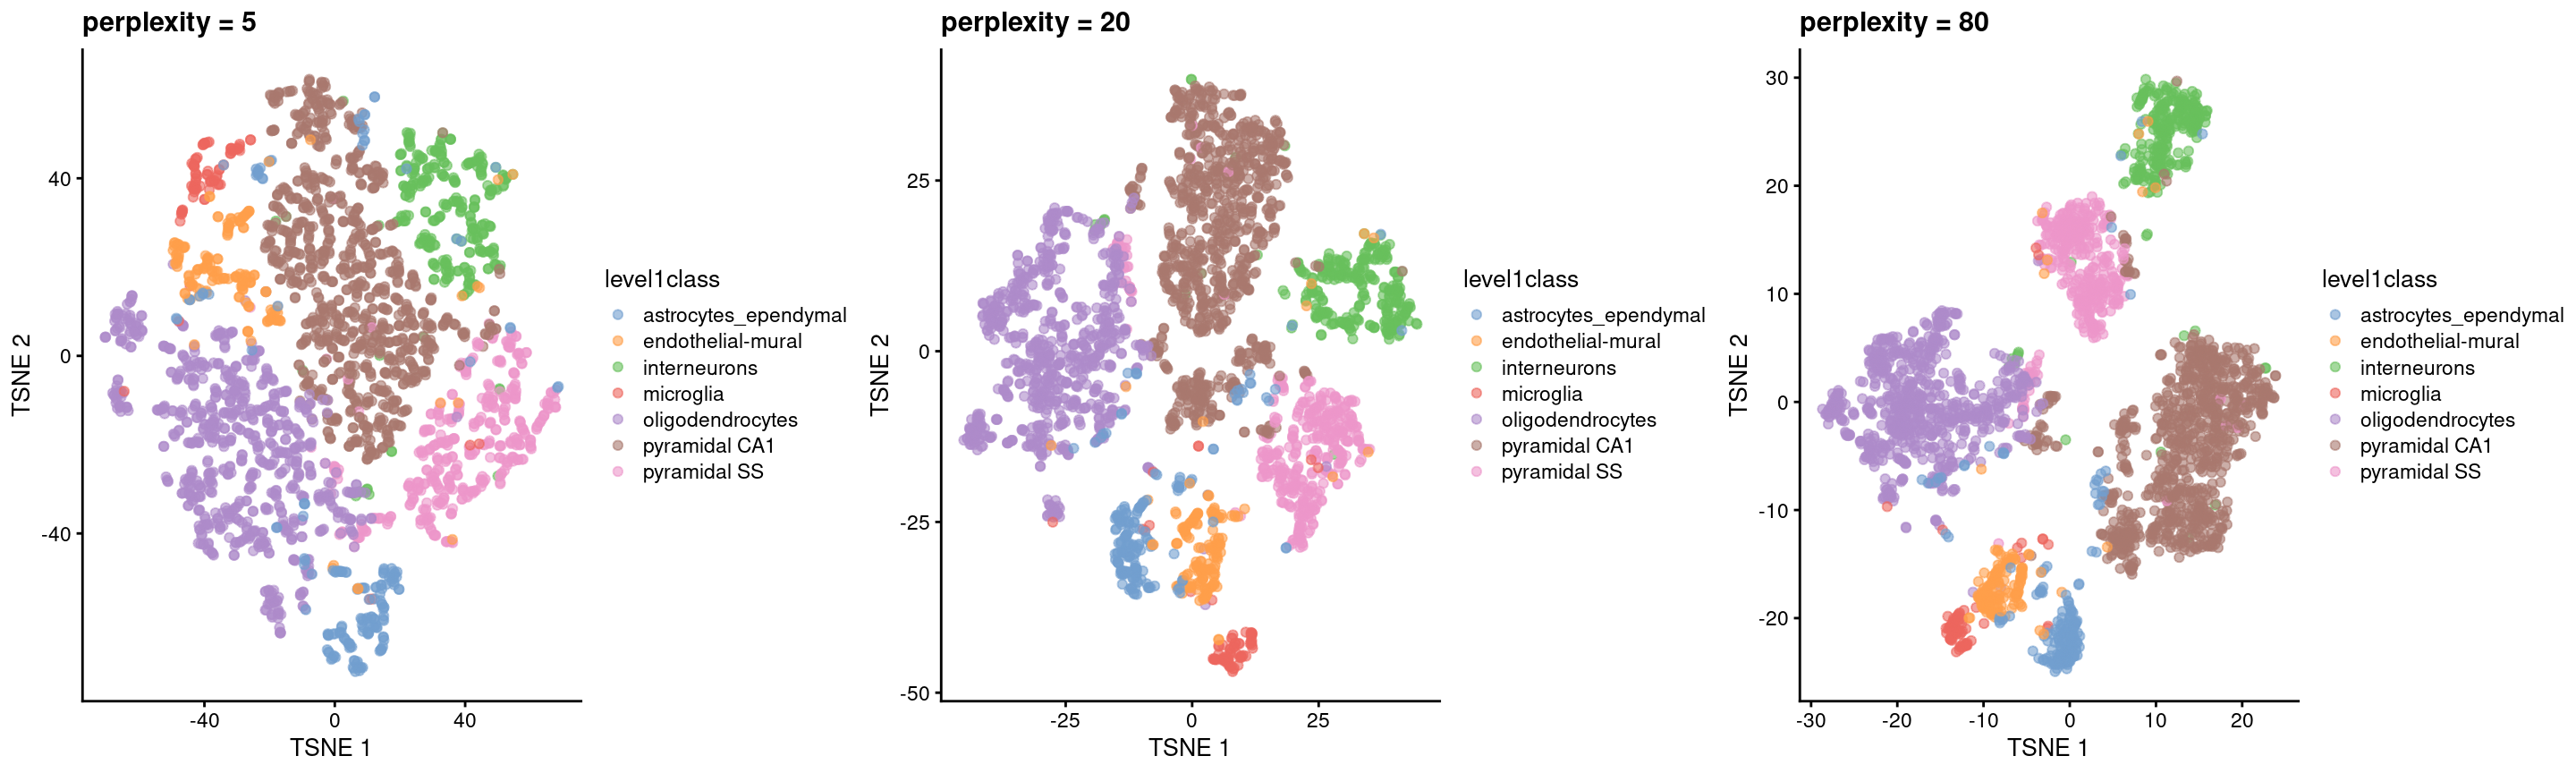 $t$-SNE plots constructed from the top PCs in the Zeisel brain dataset, using a range of perplexity values. Each point represents a cell, coloured according to its annotation.